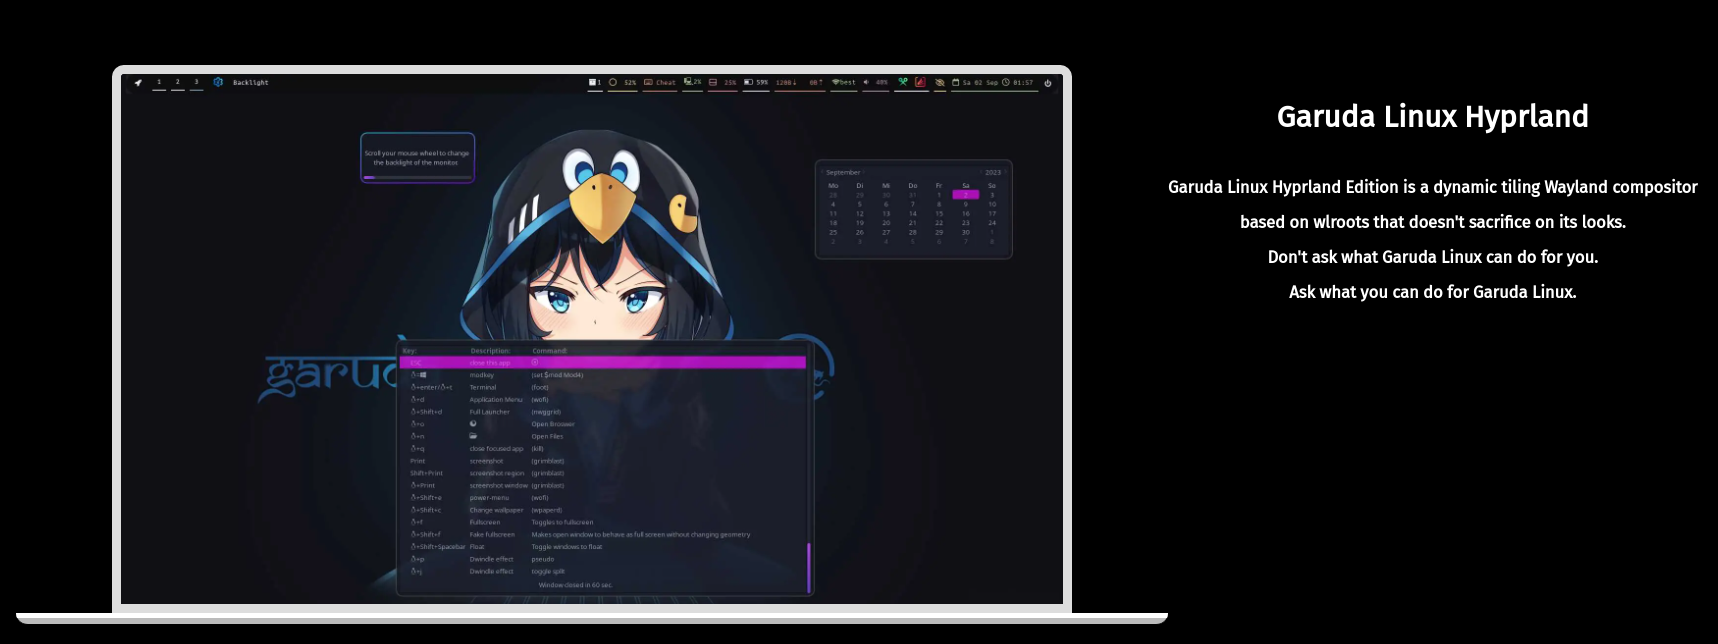 a screenshot showing the garuda linux hyprland banner on the official website